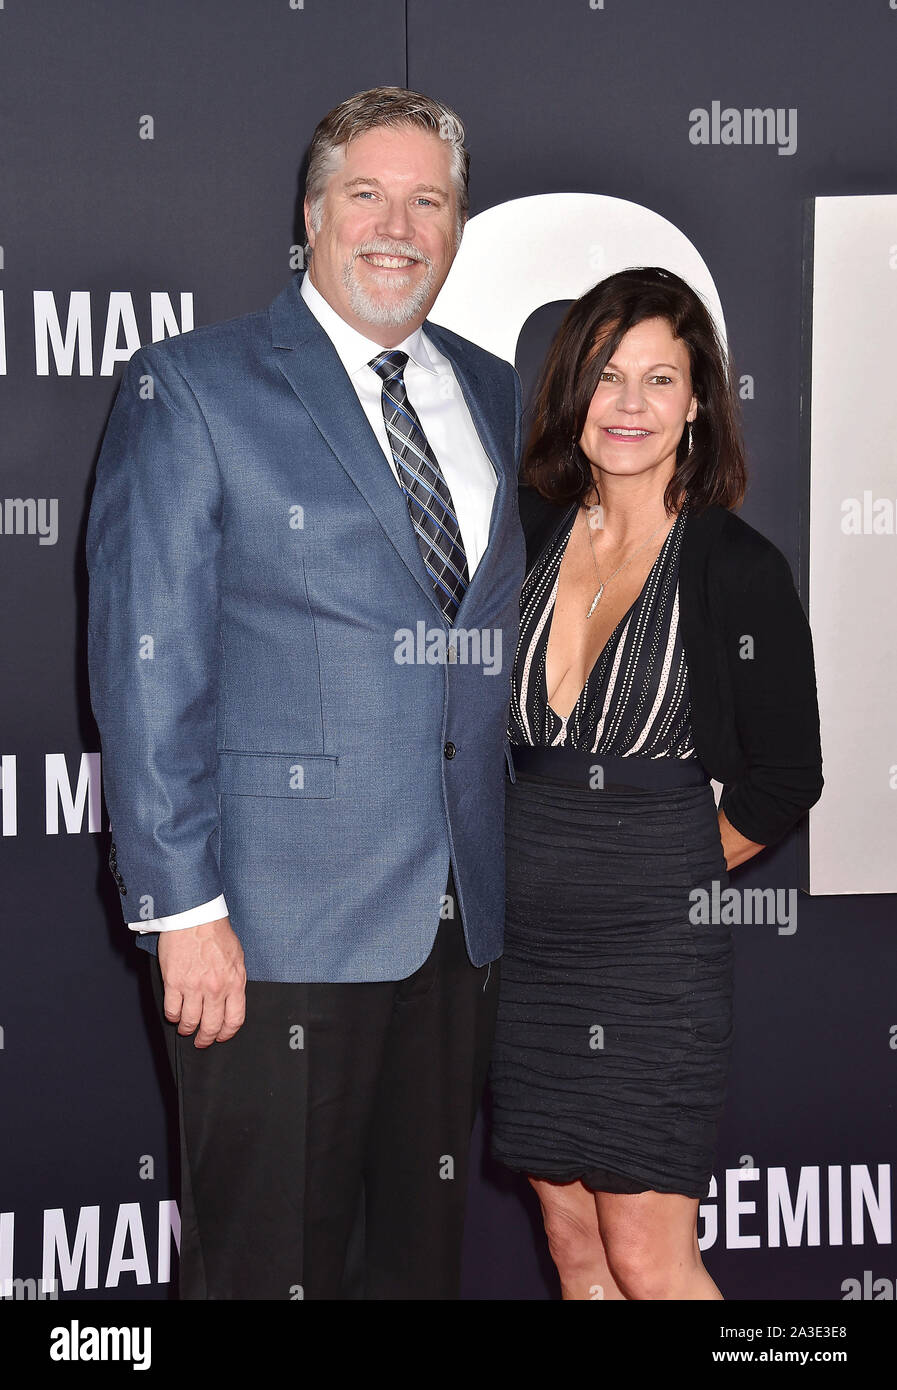 HOLLYWOOD, CA - OCTOBER 06:  Bill Westenhofer and Linda Westenhofer attend Paramount Pictures' Premiere Of 'Gemini Man' at TCL Chinese Theatre on October 06, 2019 in Hollywood, California. Stock Photo